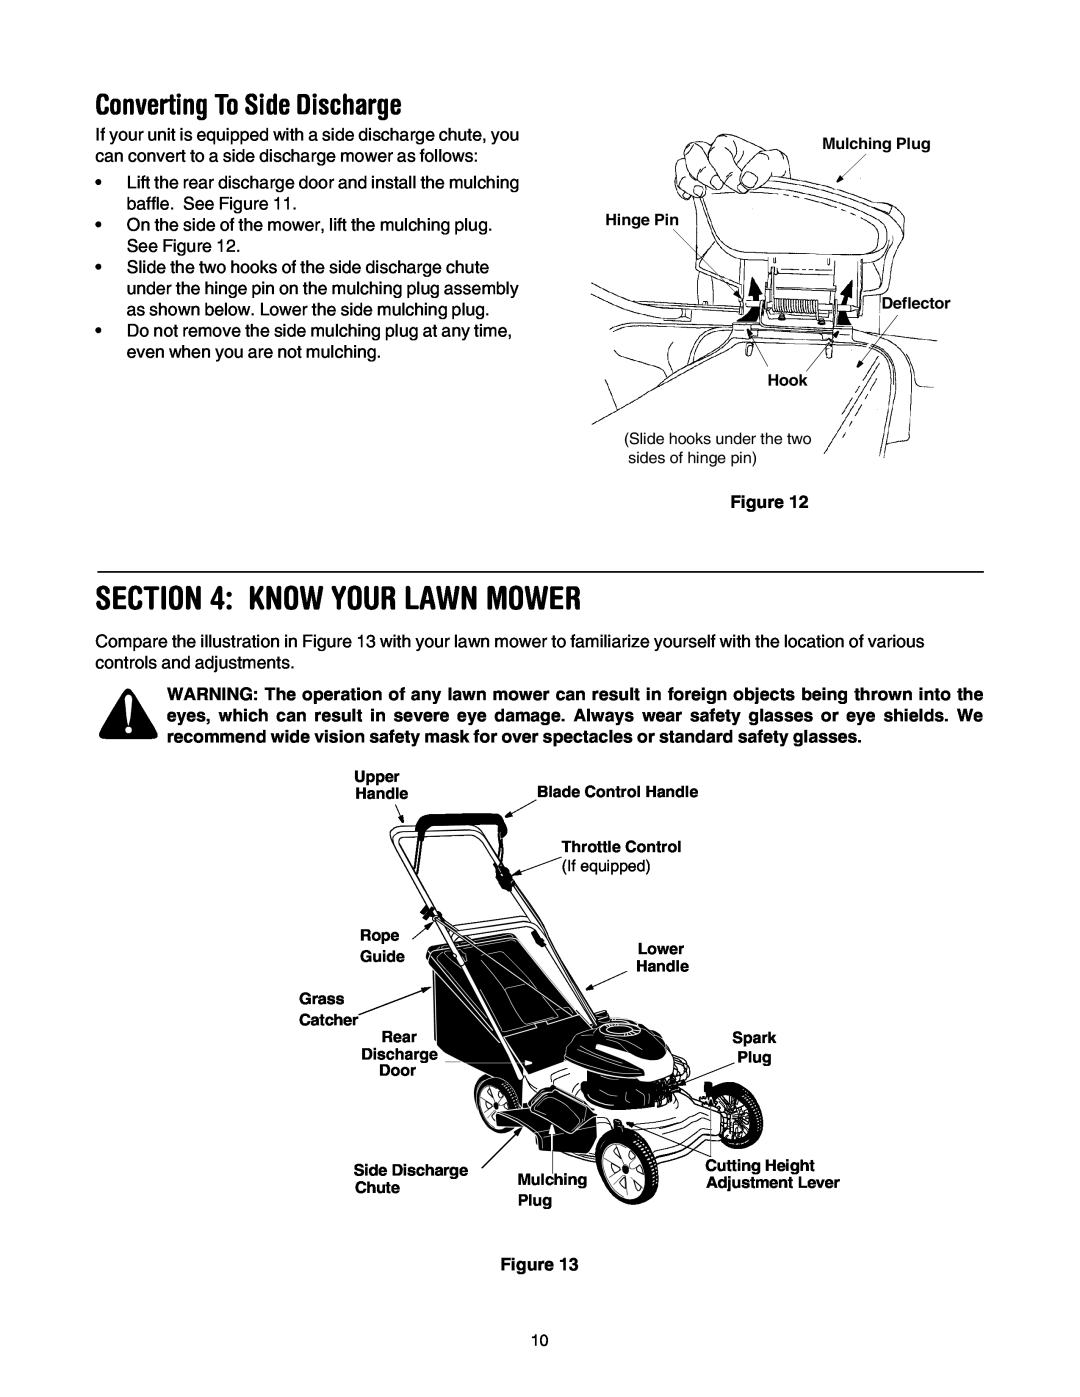 Yard Machines 430 manual Know Your Lawn Mower, Converting To Side Discharge 